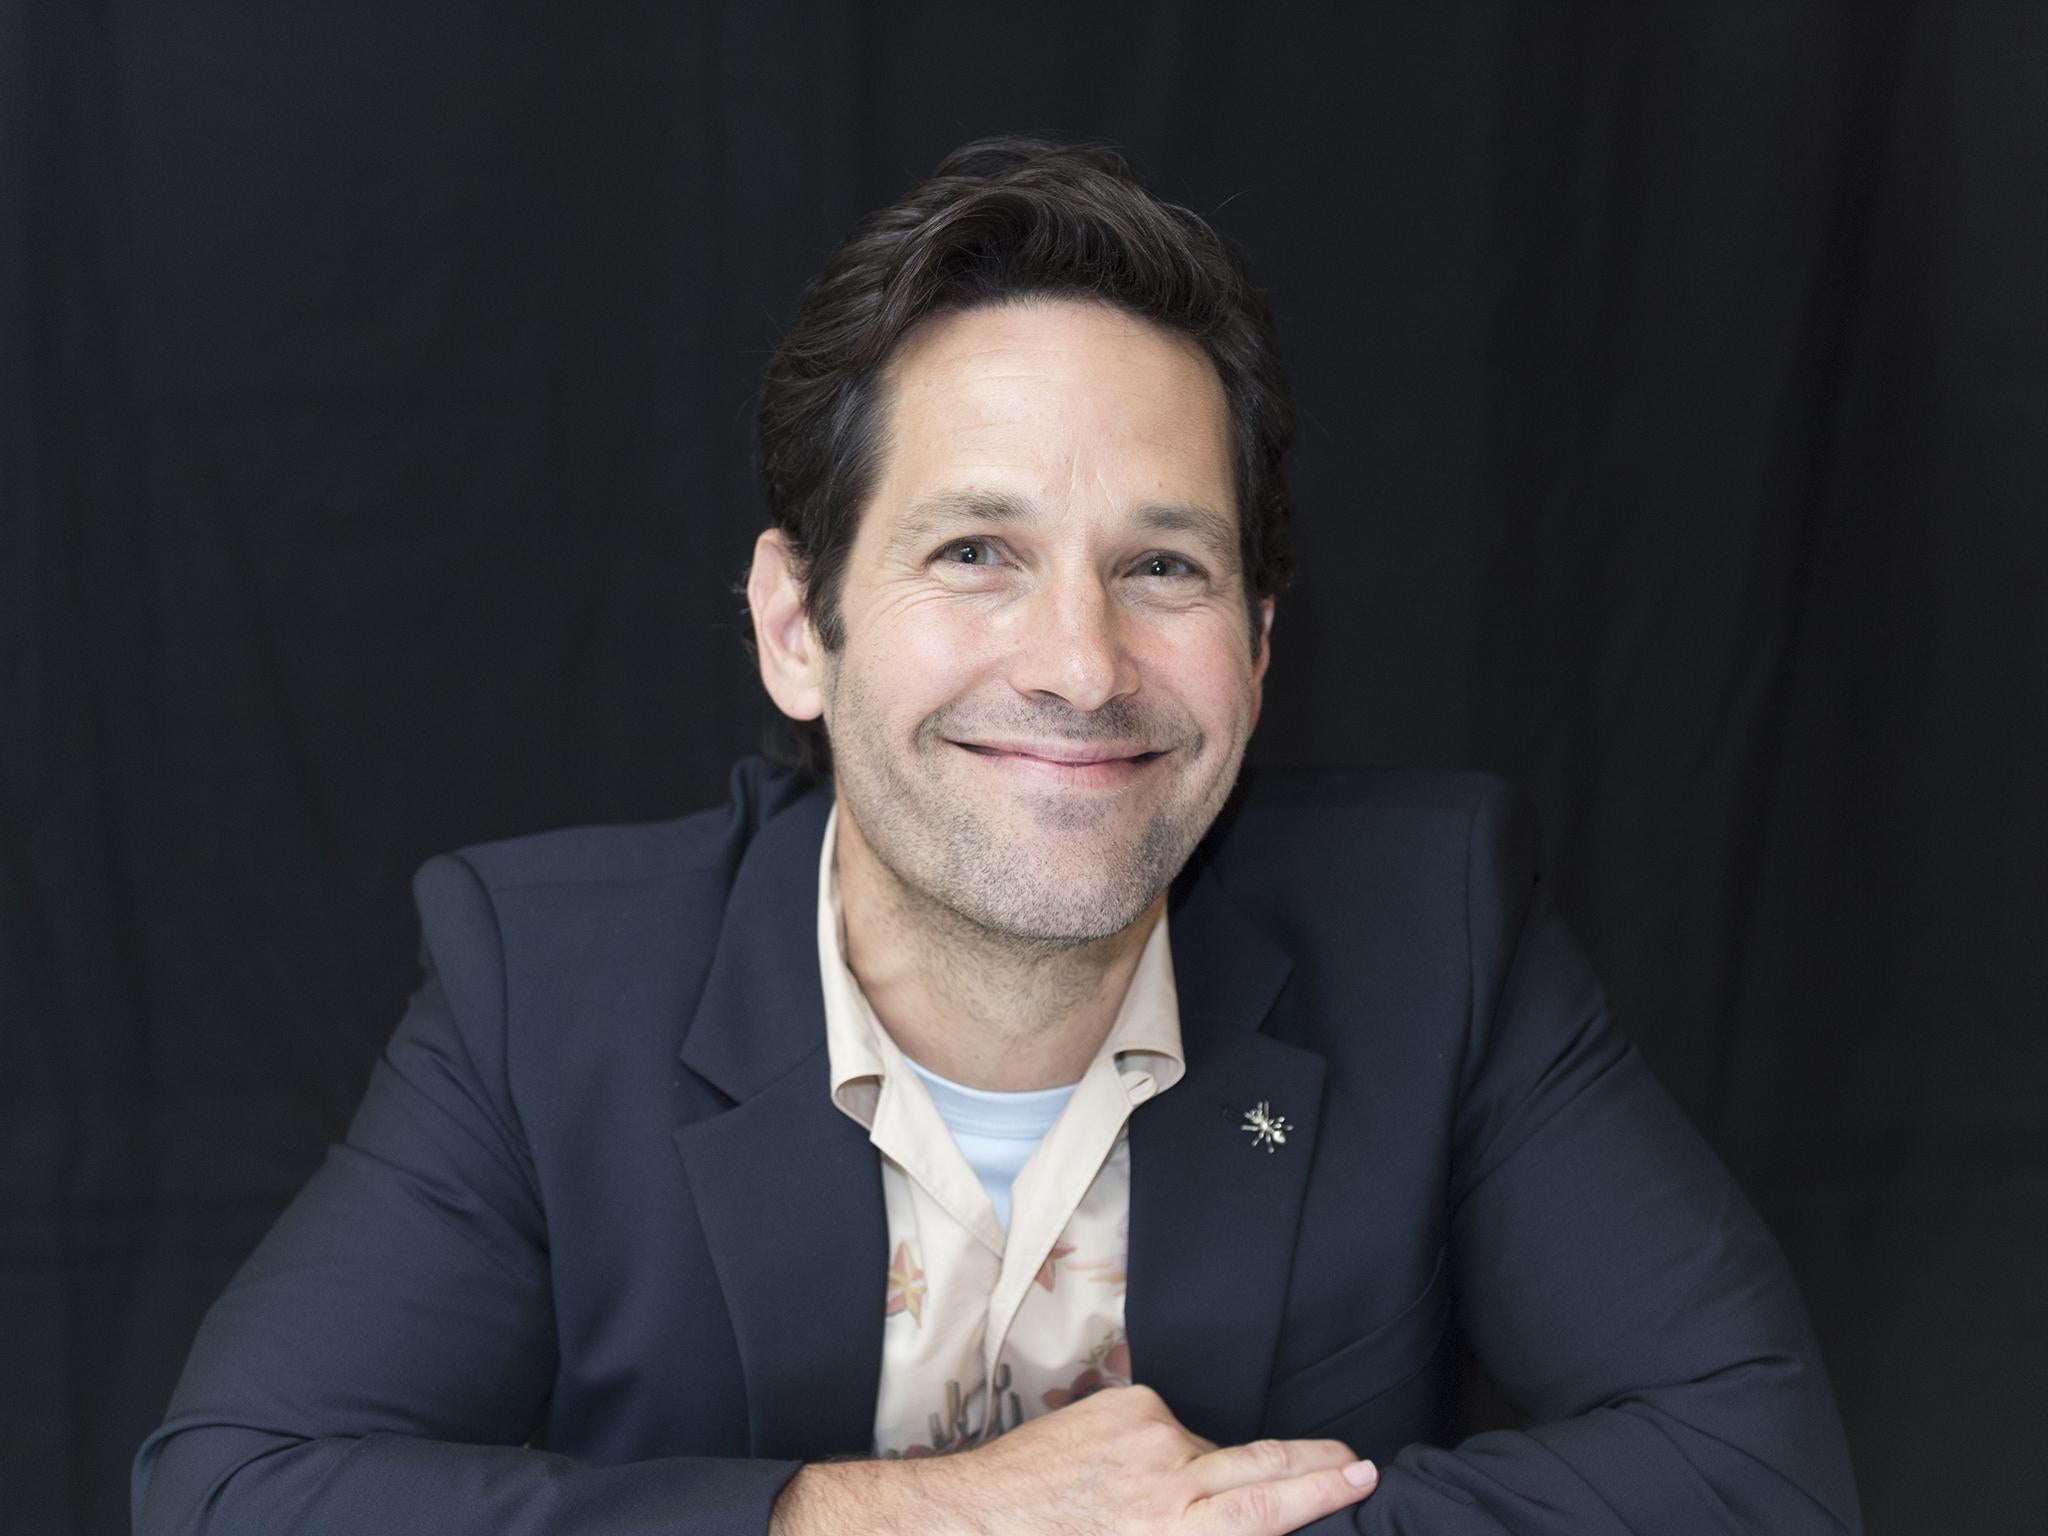 Paul Rudd on Ant-Man, career swerves, and why he's happy to be the